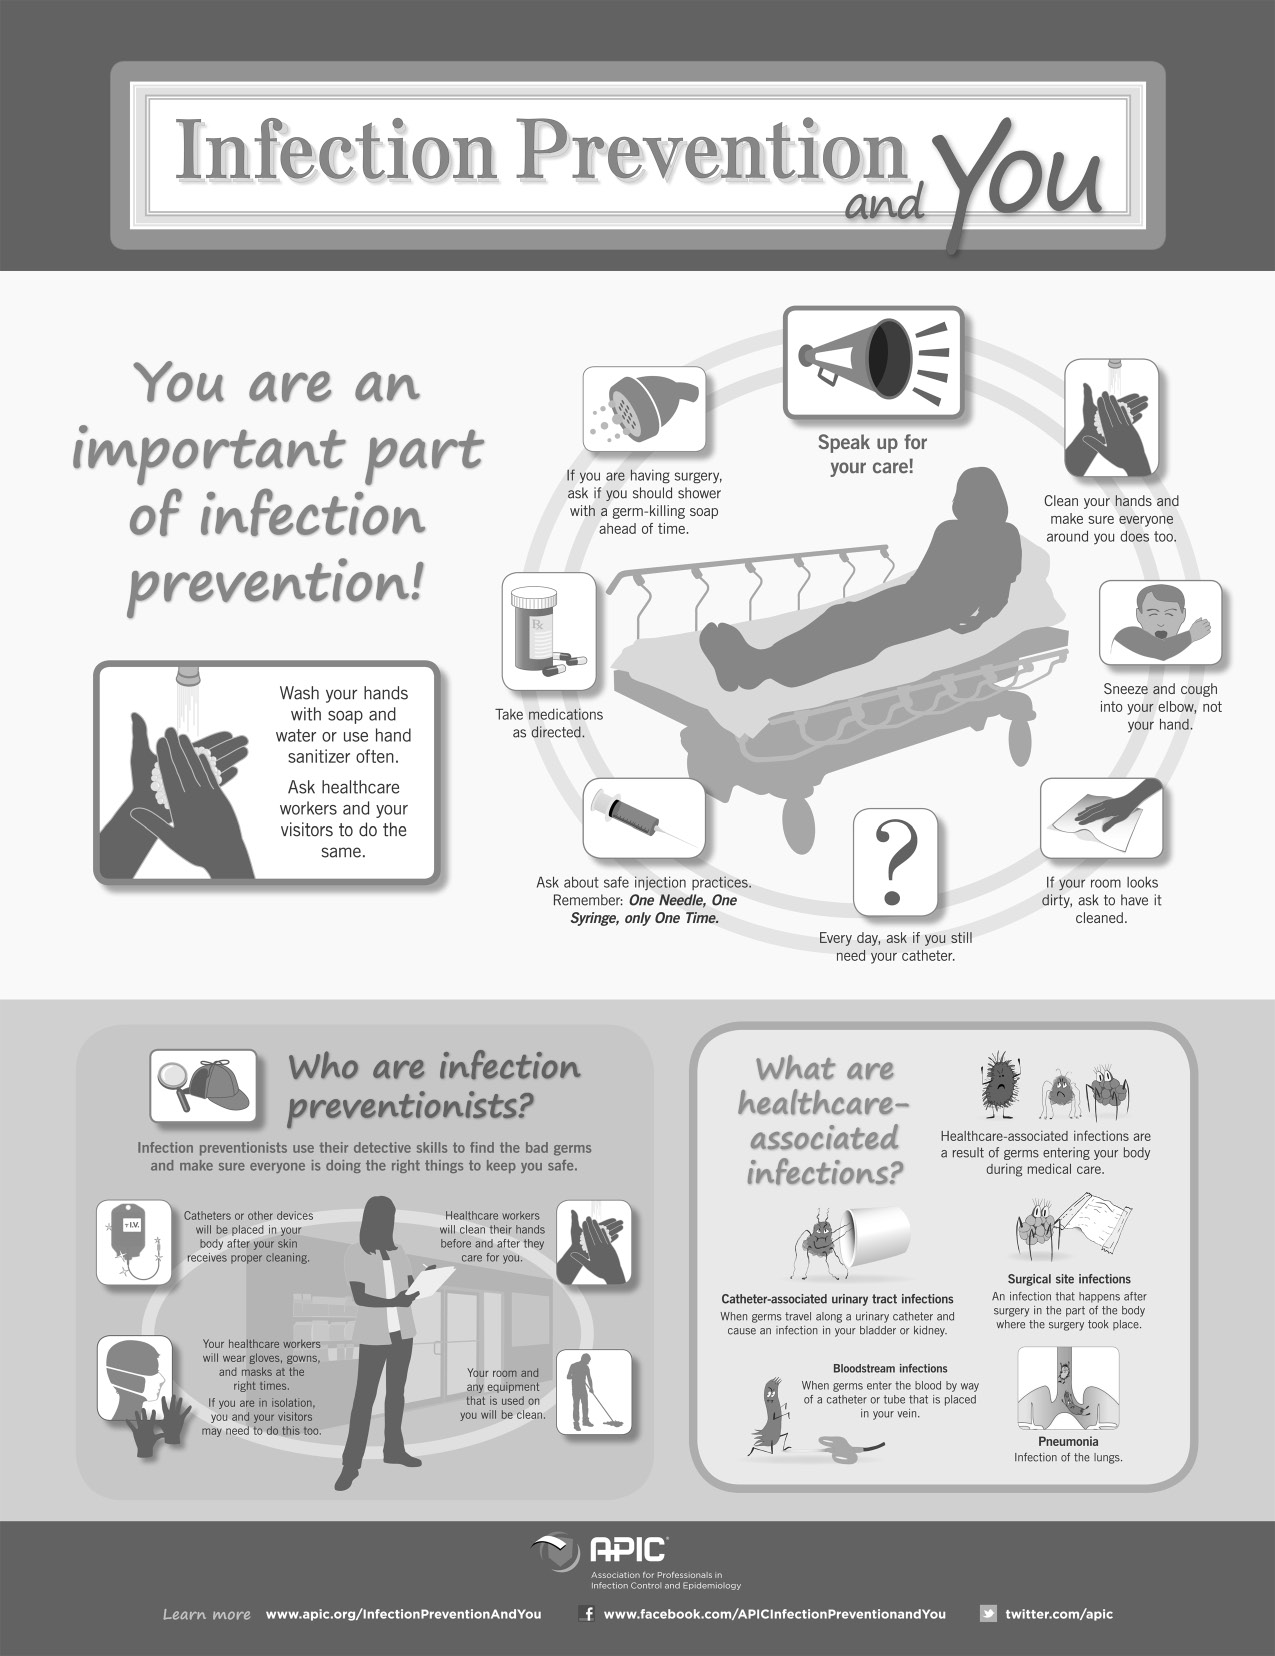 IP and You Infographic Poster 2013